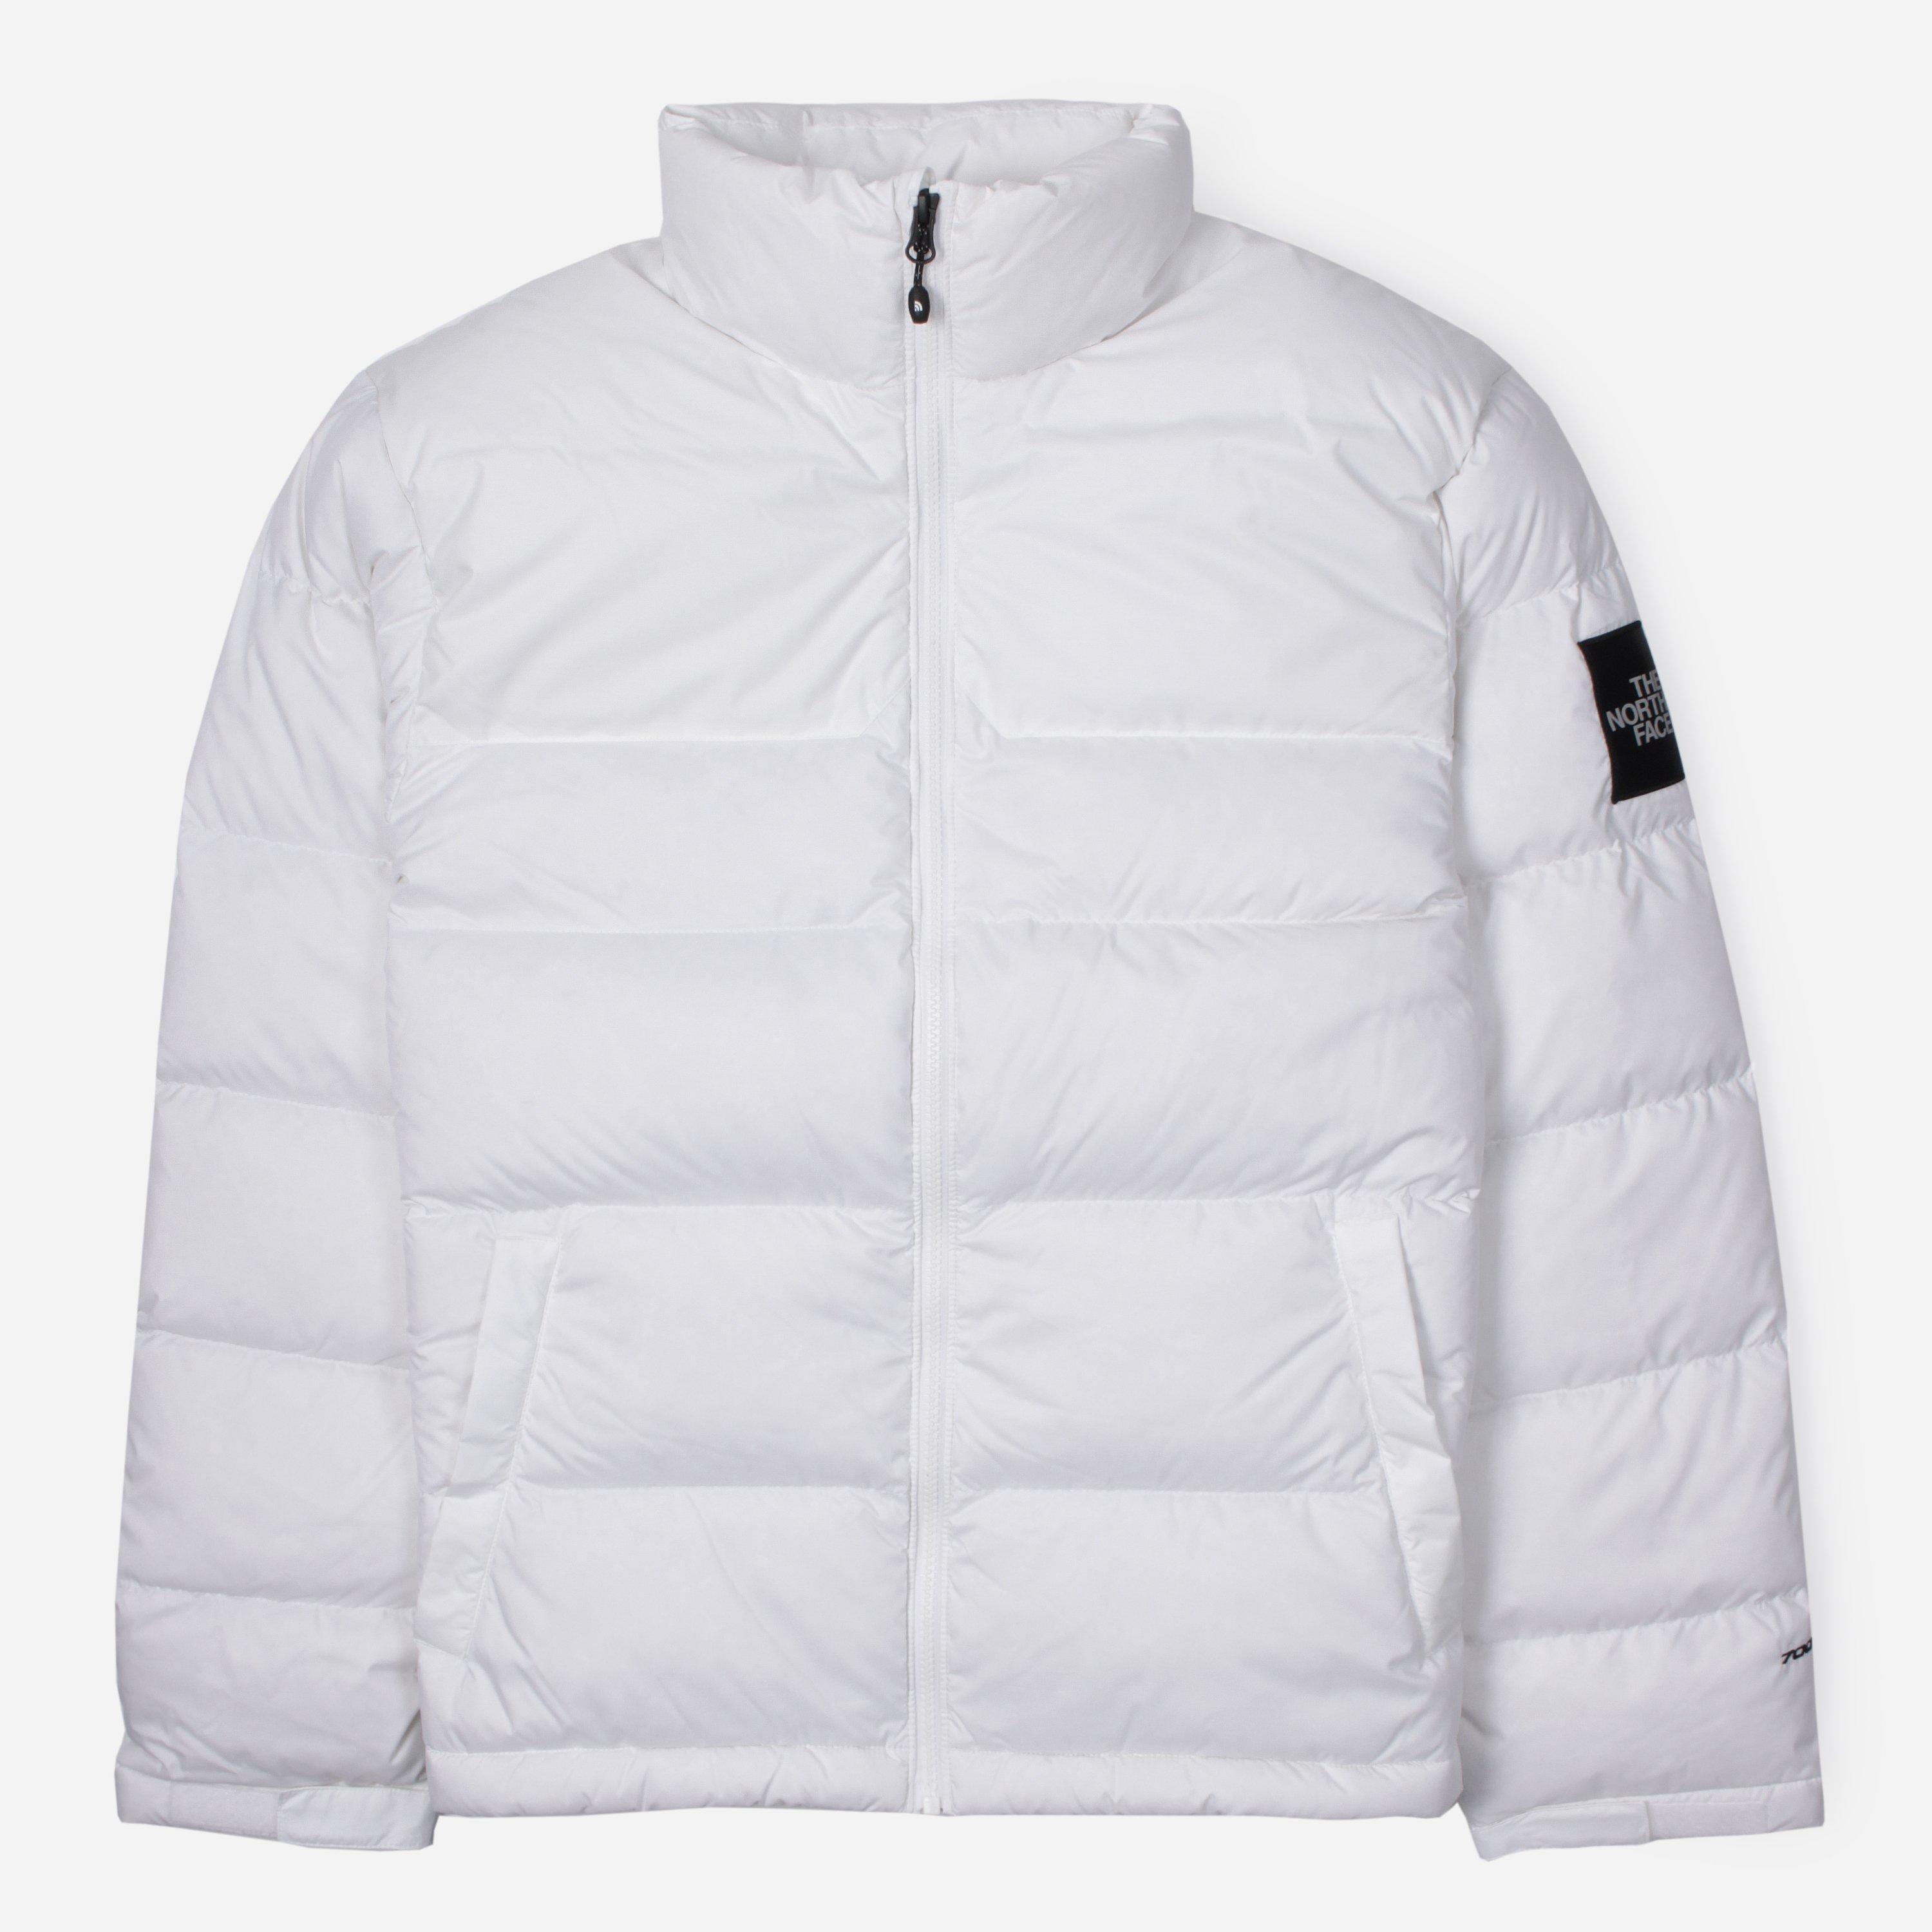 The North Face 1992 Nuptse Jacket "lunar Voyage" in White for Men - Lyst